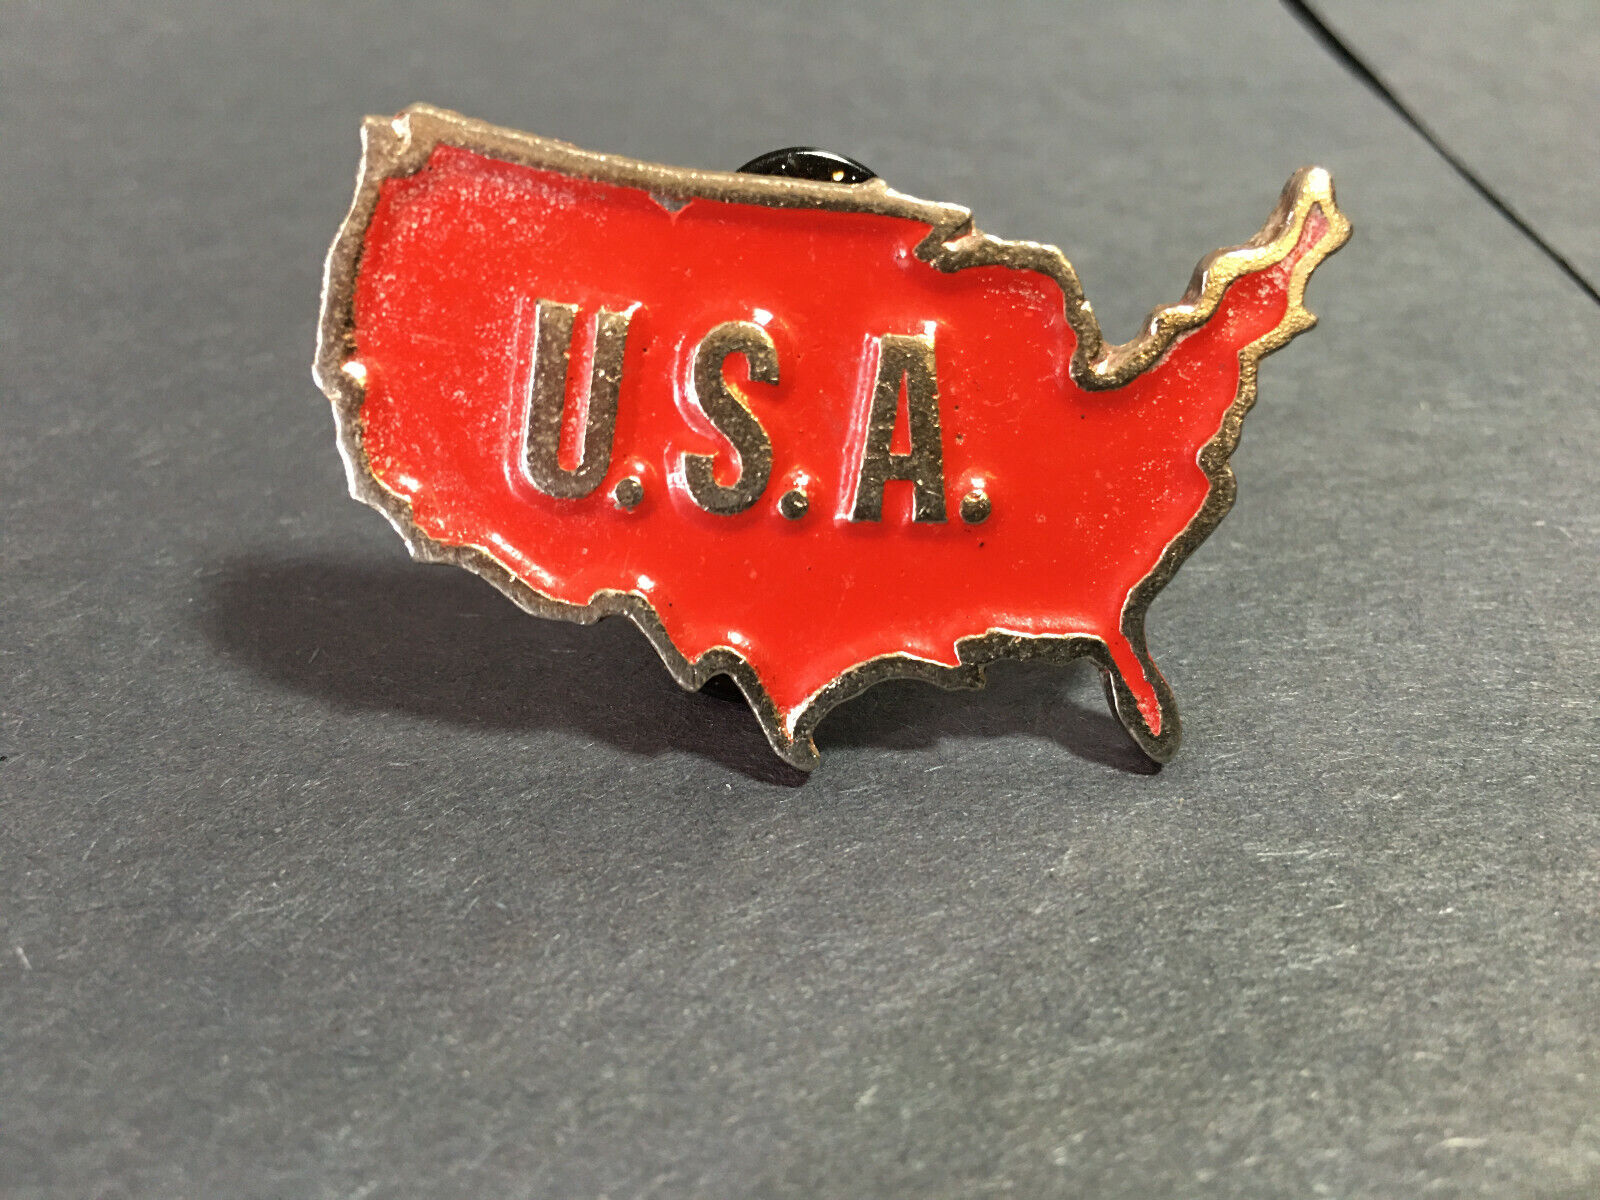 USA PIN -  MM Limited Chicago U.S.A  Pin,  Vintage Red USA lapel or jacket Pin